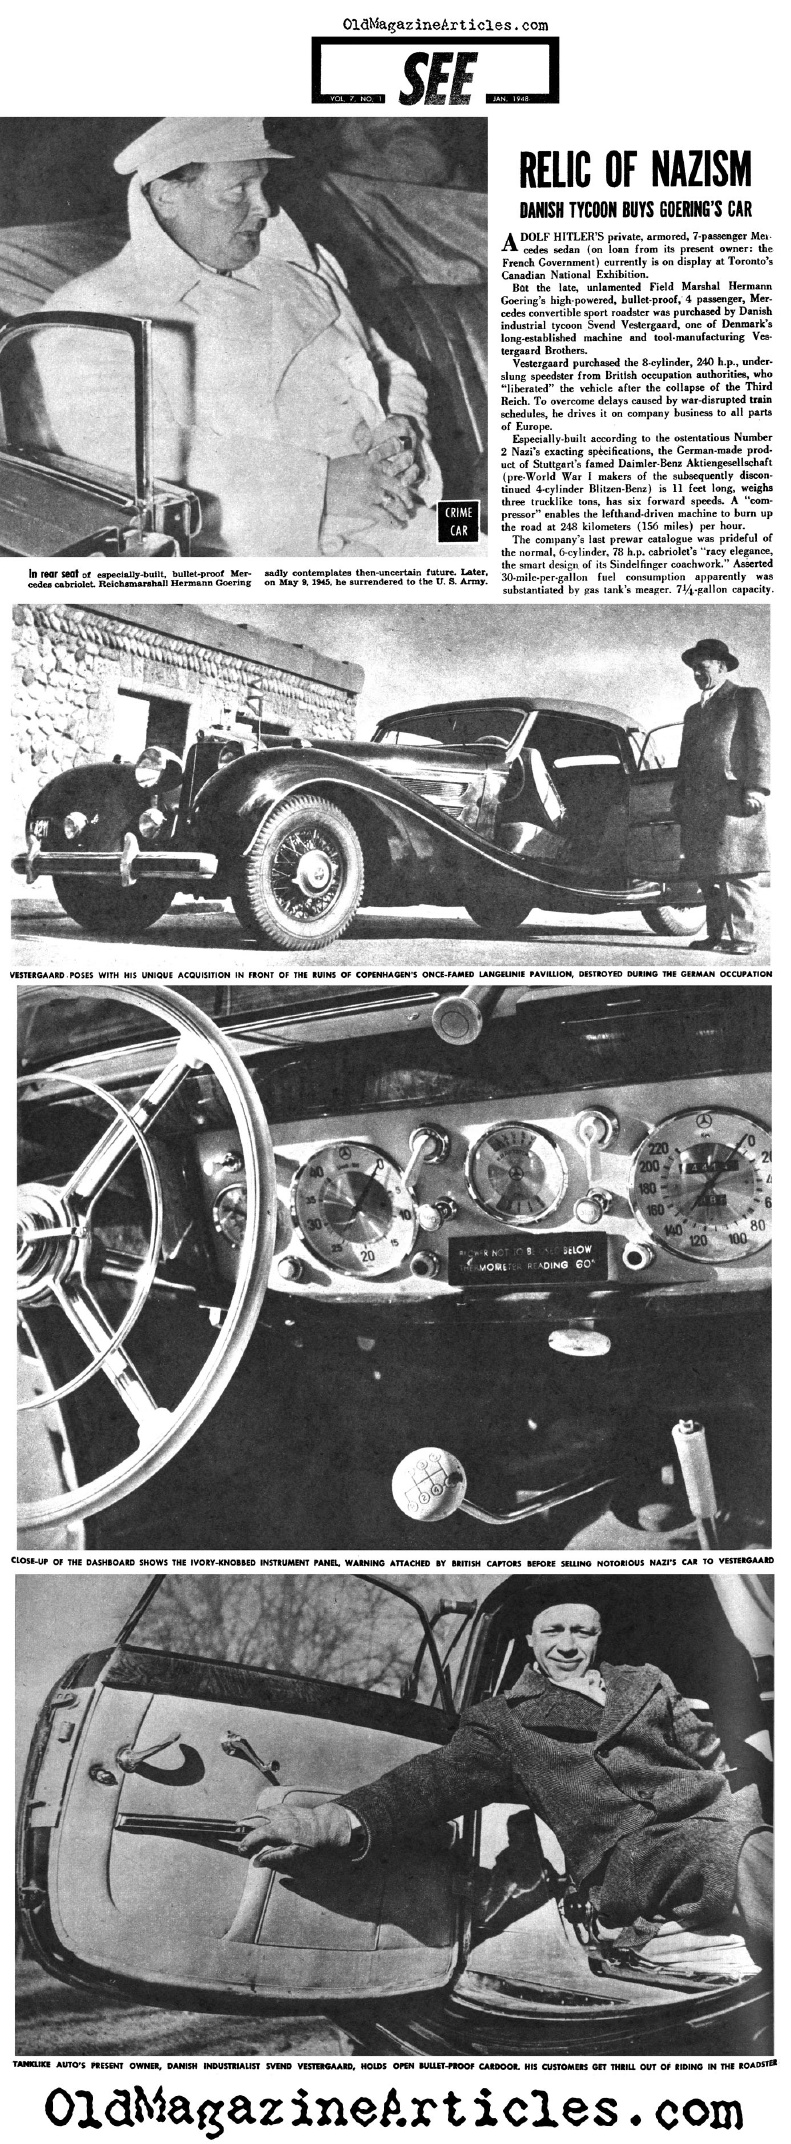 Hermann Goering's Car Finds a New Owner (See Magazine, 1948)